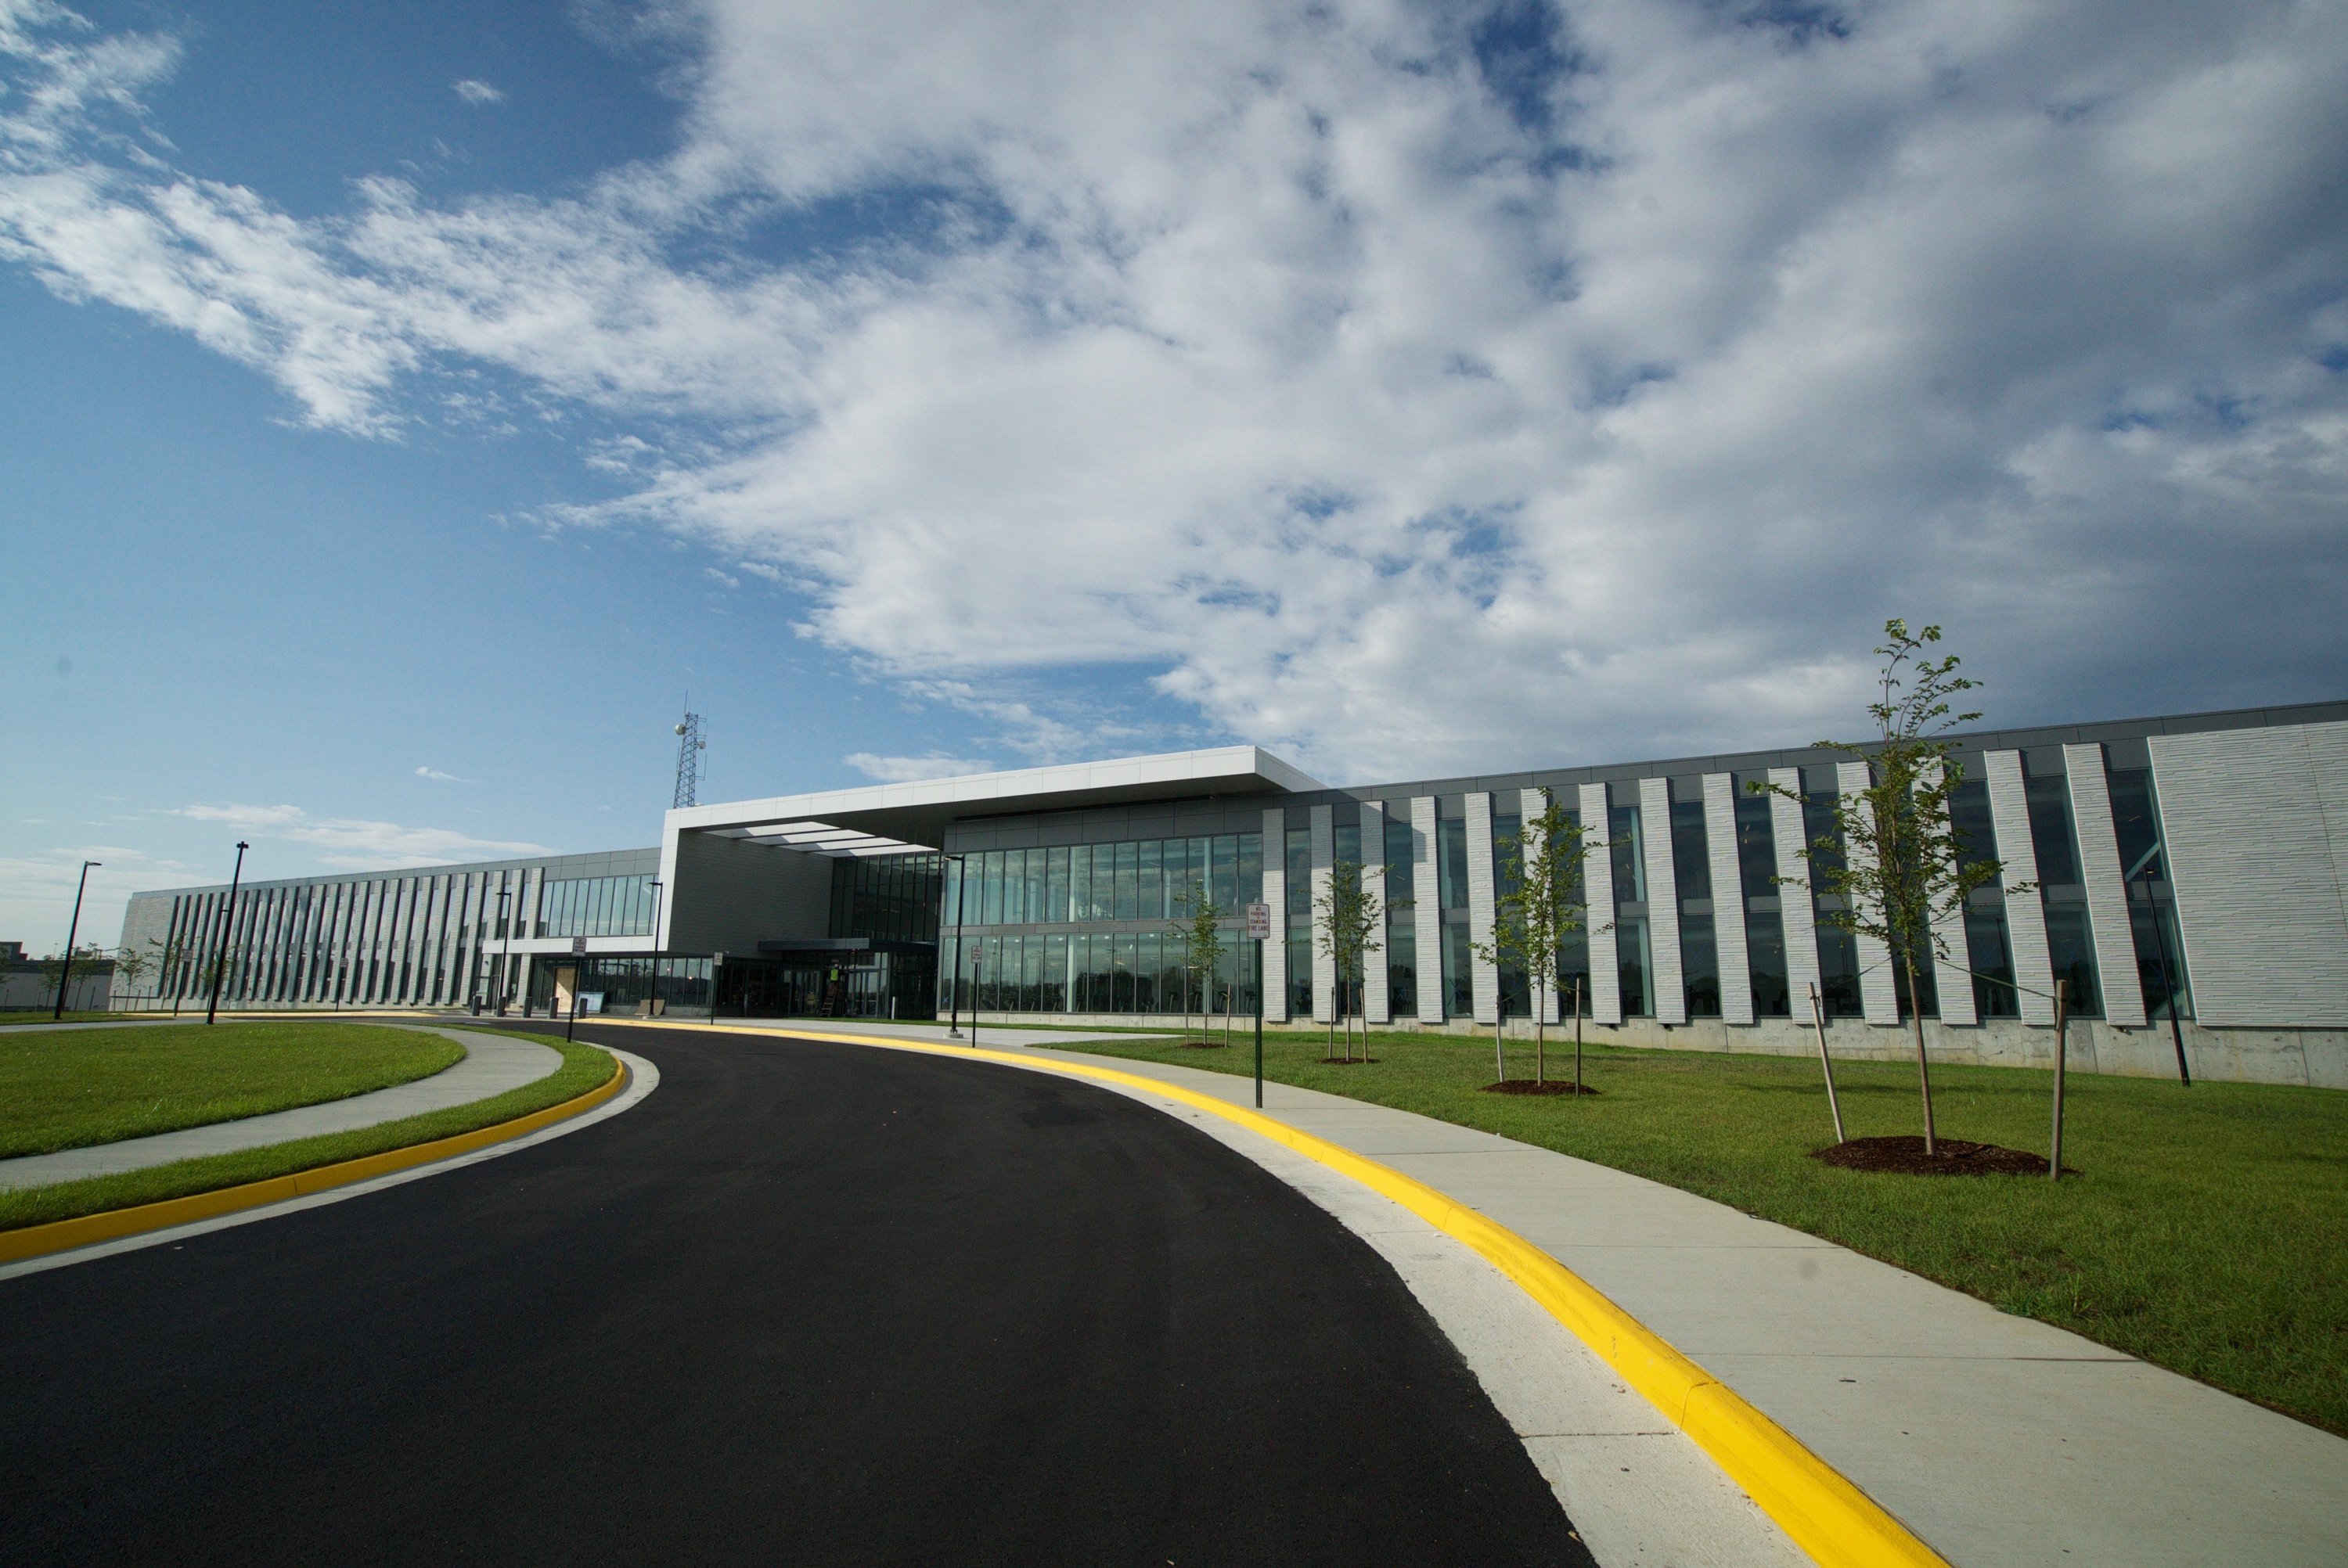 The St. James Sports and Athletics Center